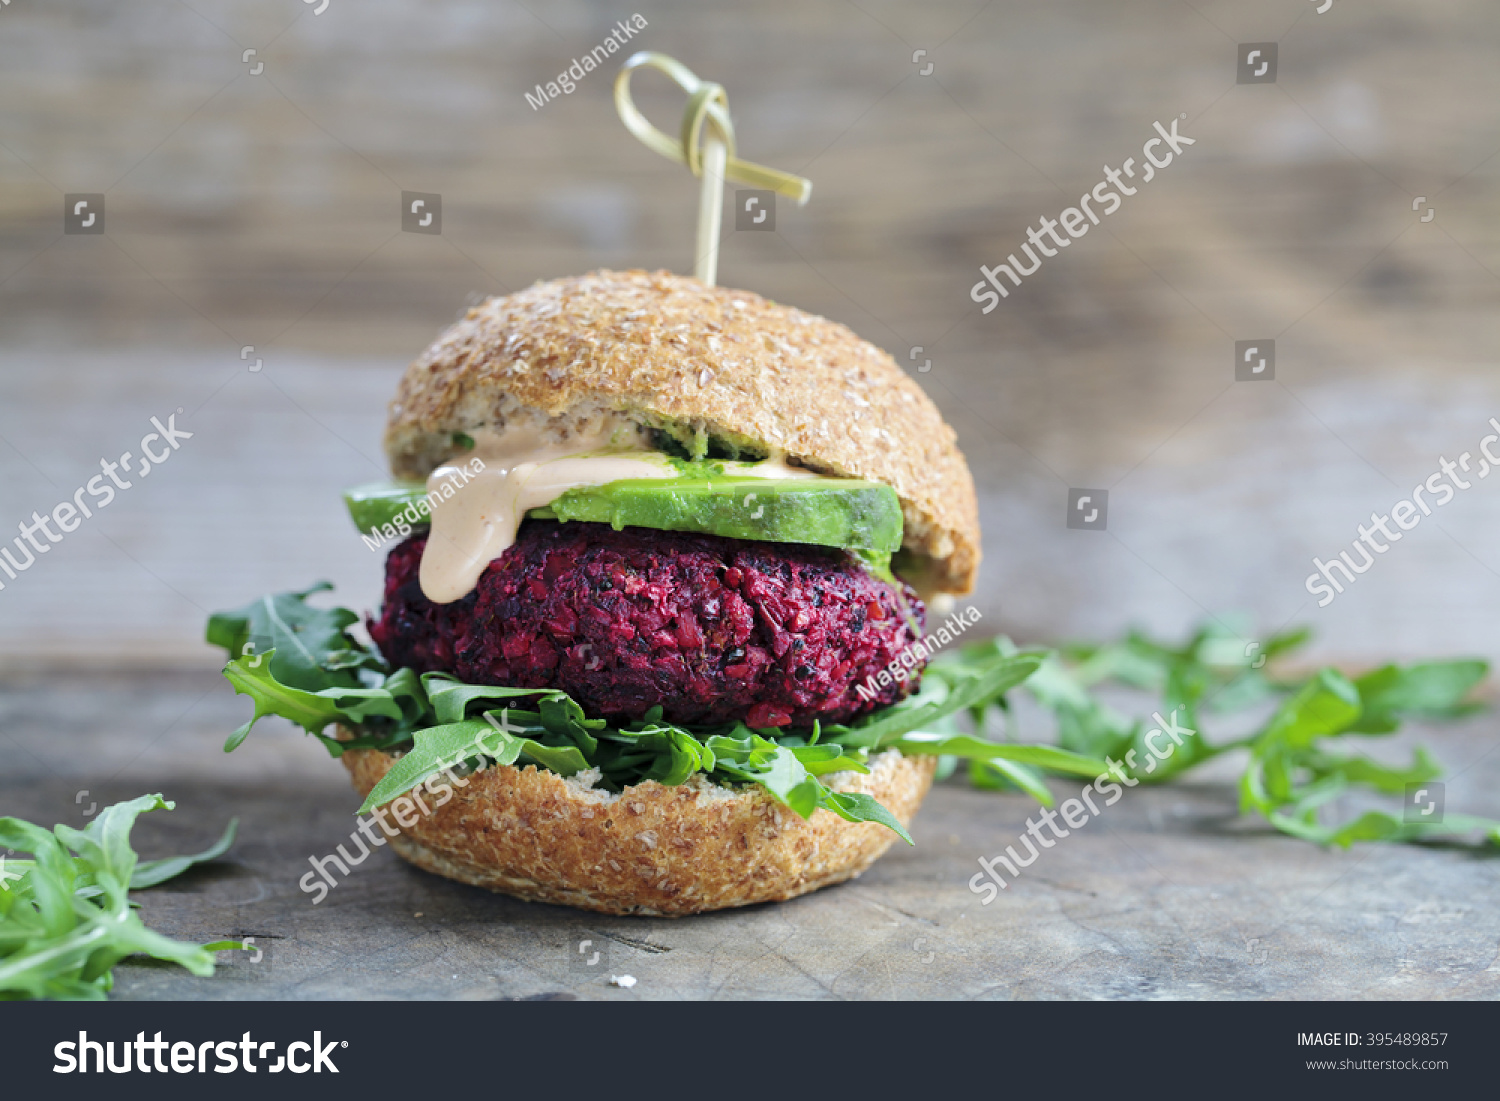 Vegetarian burger made of beetroot, broccoli and chickpeas with avocado and arugula #395489857